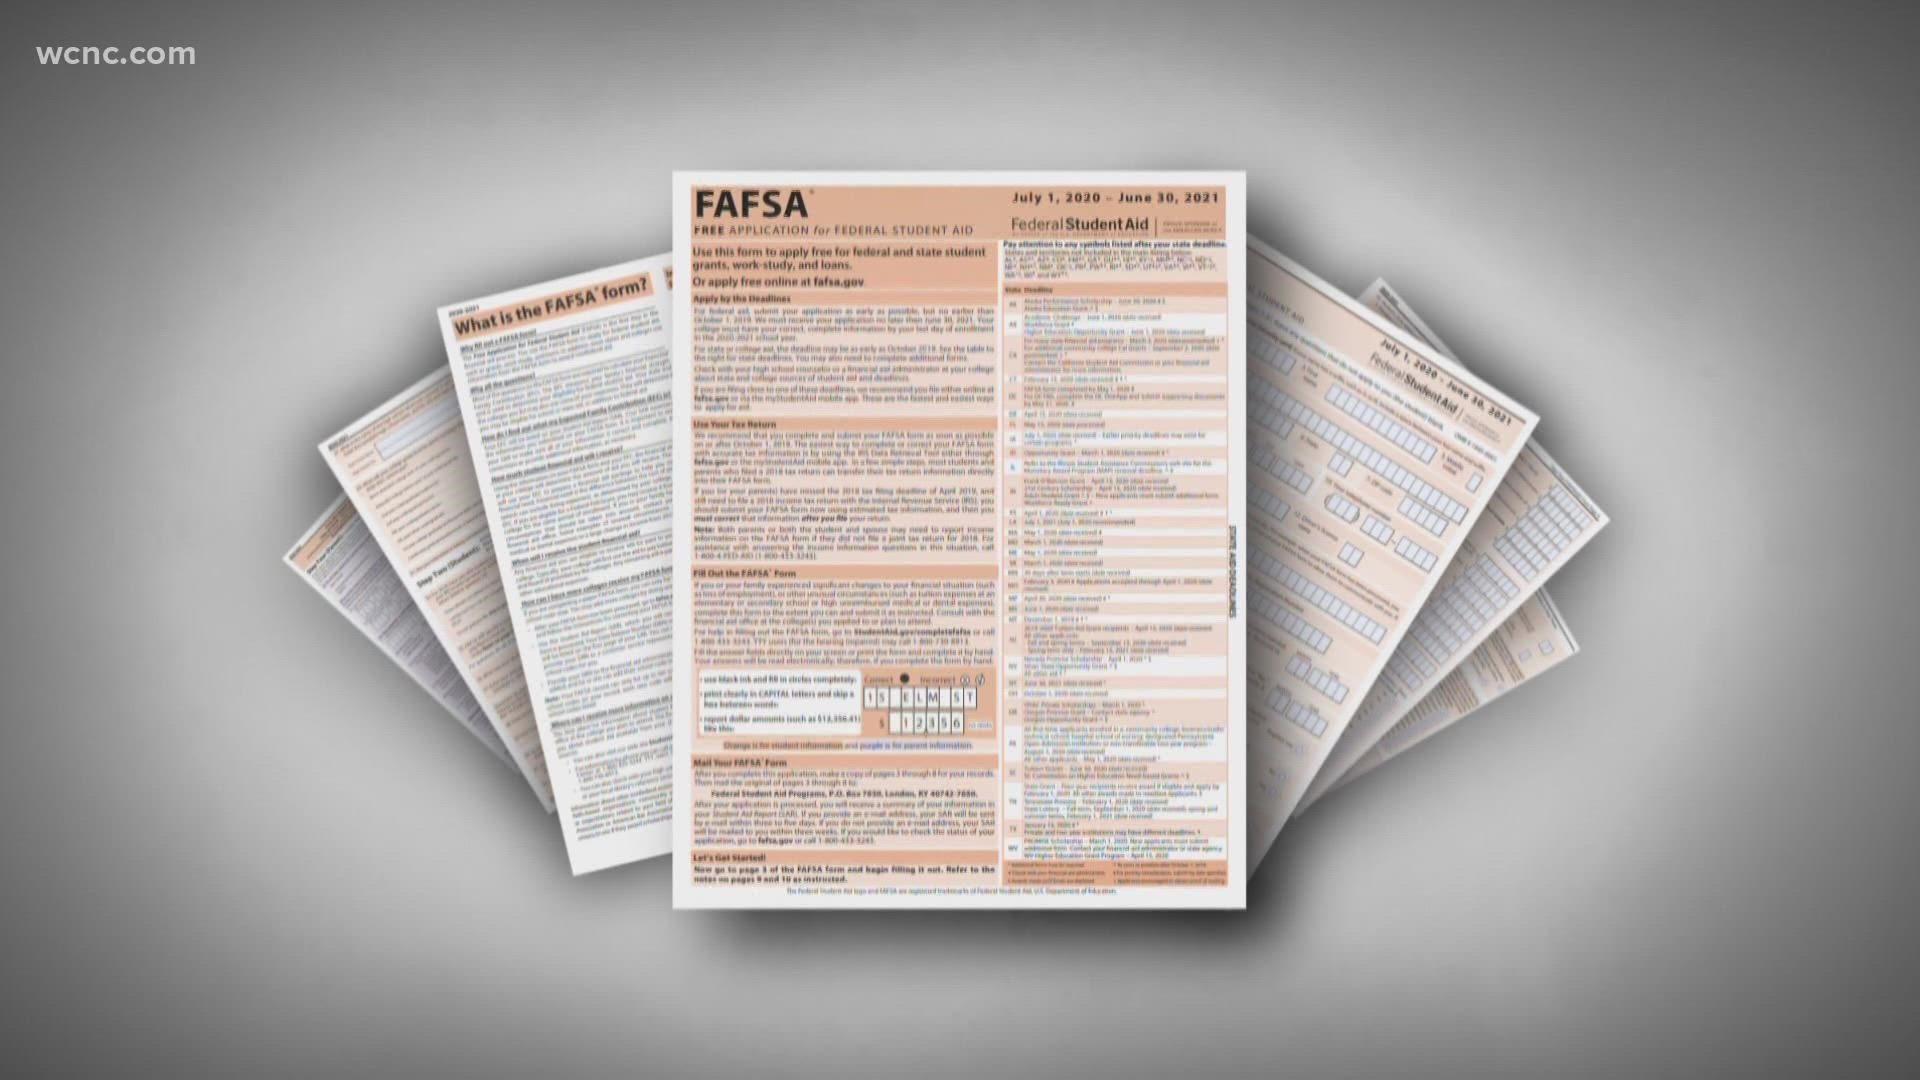 The federal government is making changes to its FAFSA application process. These changes are set to take effect in 2024.